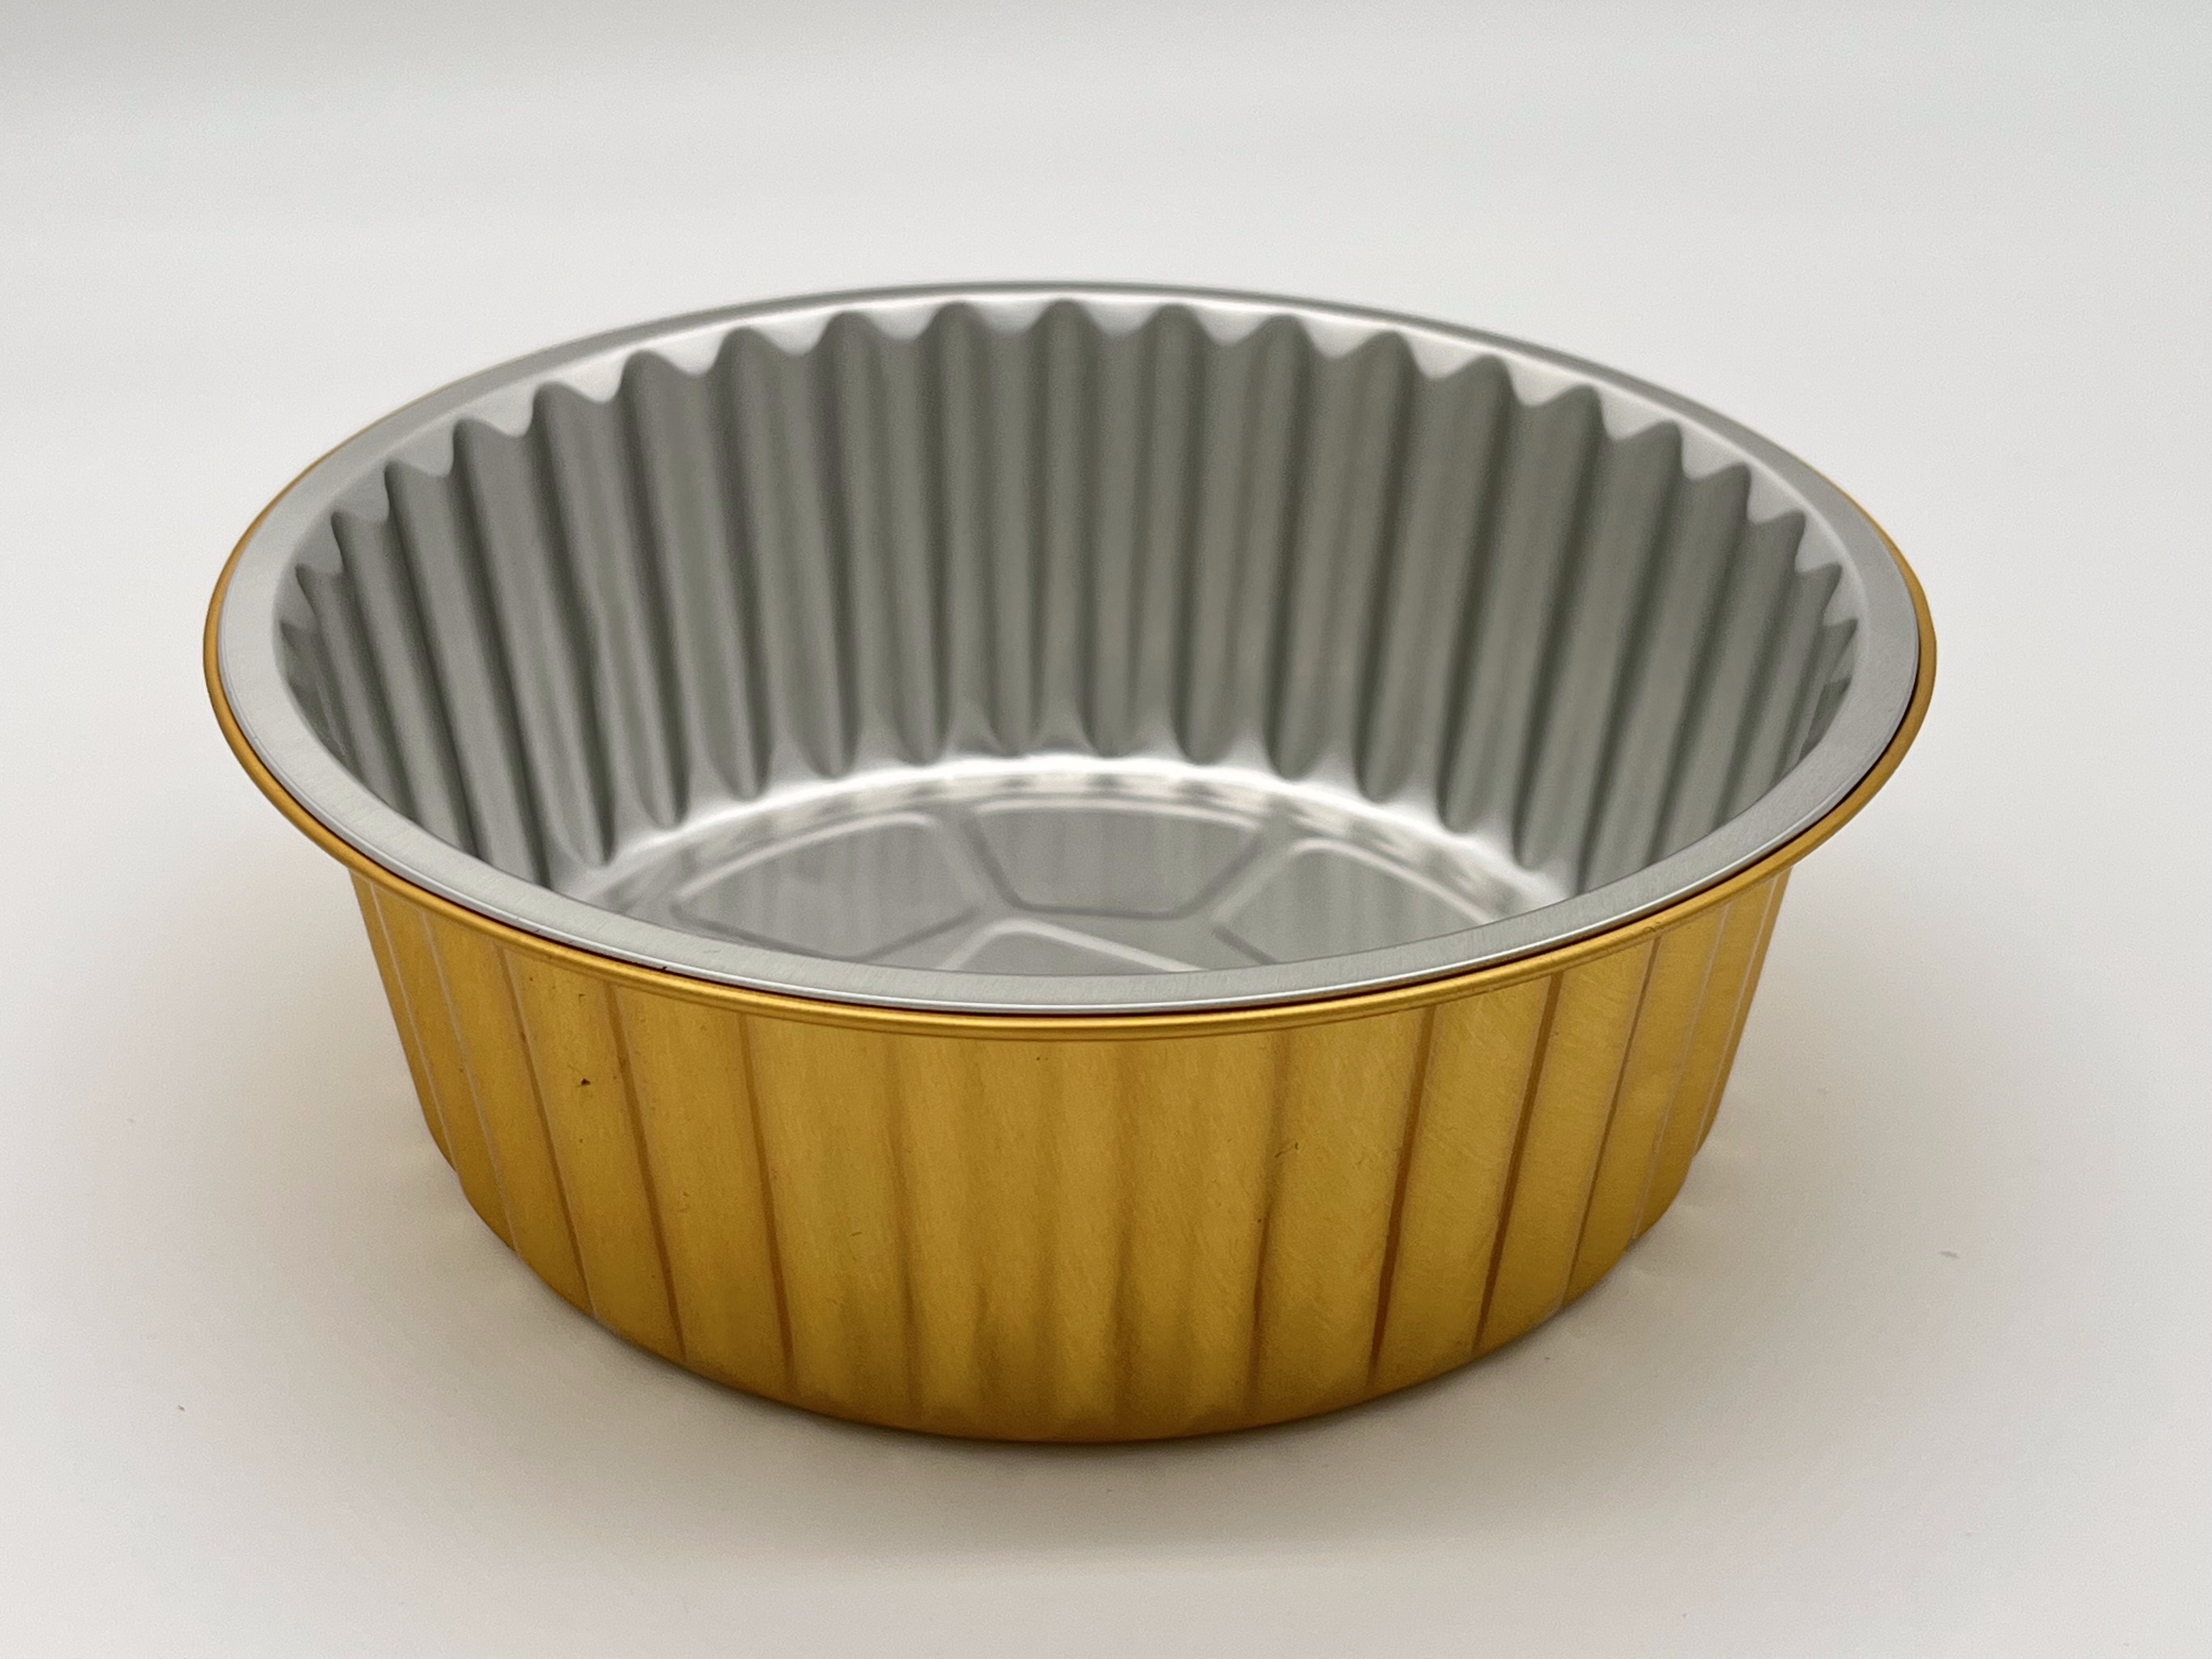 Why Choose a Manufacturer of Aluminum Foil Containers - CANLID INDUSTRIES